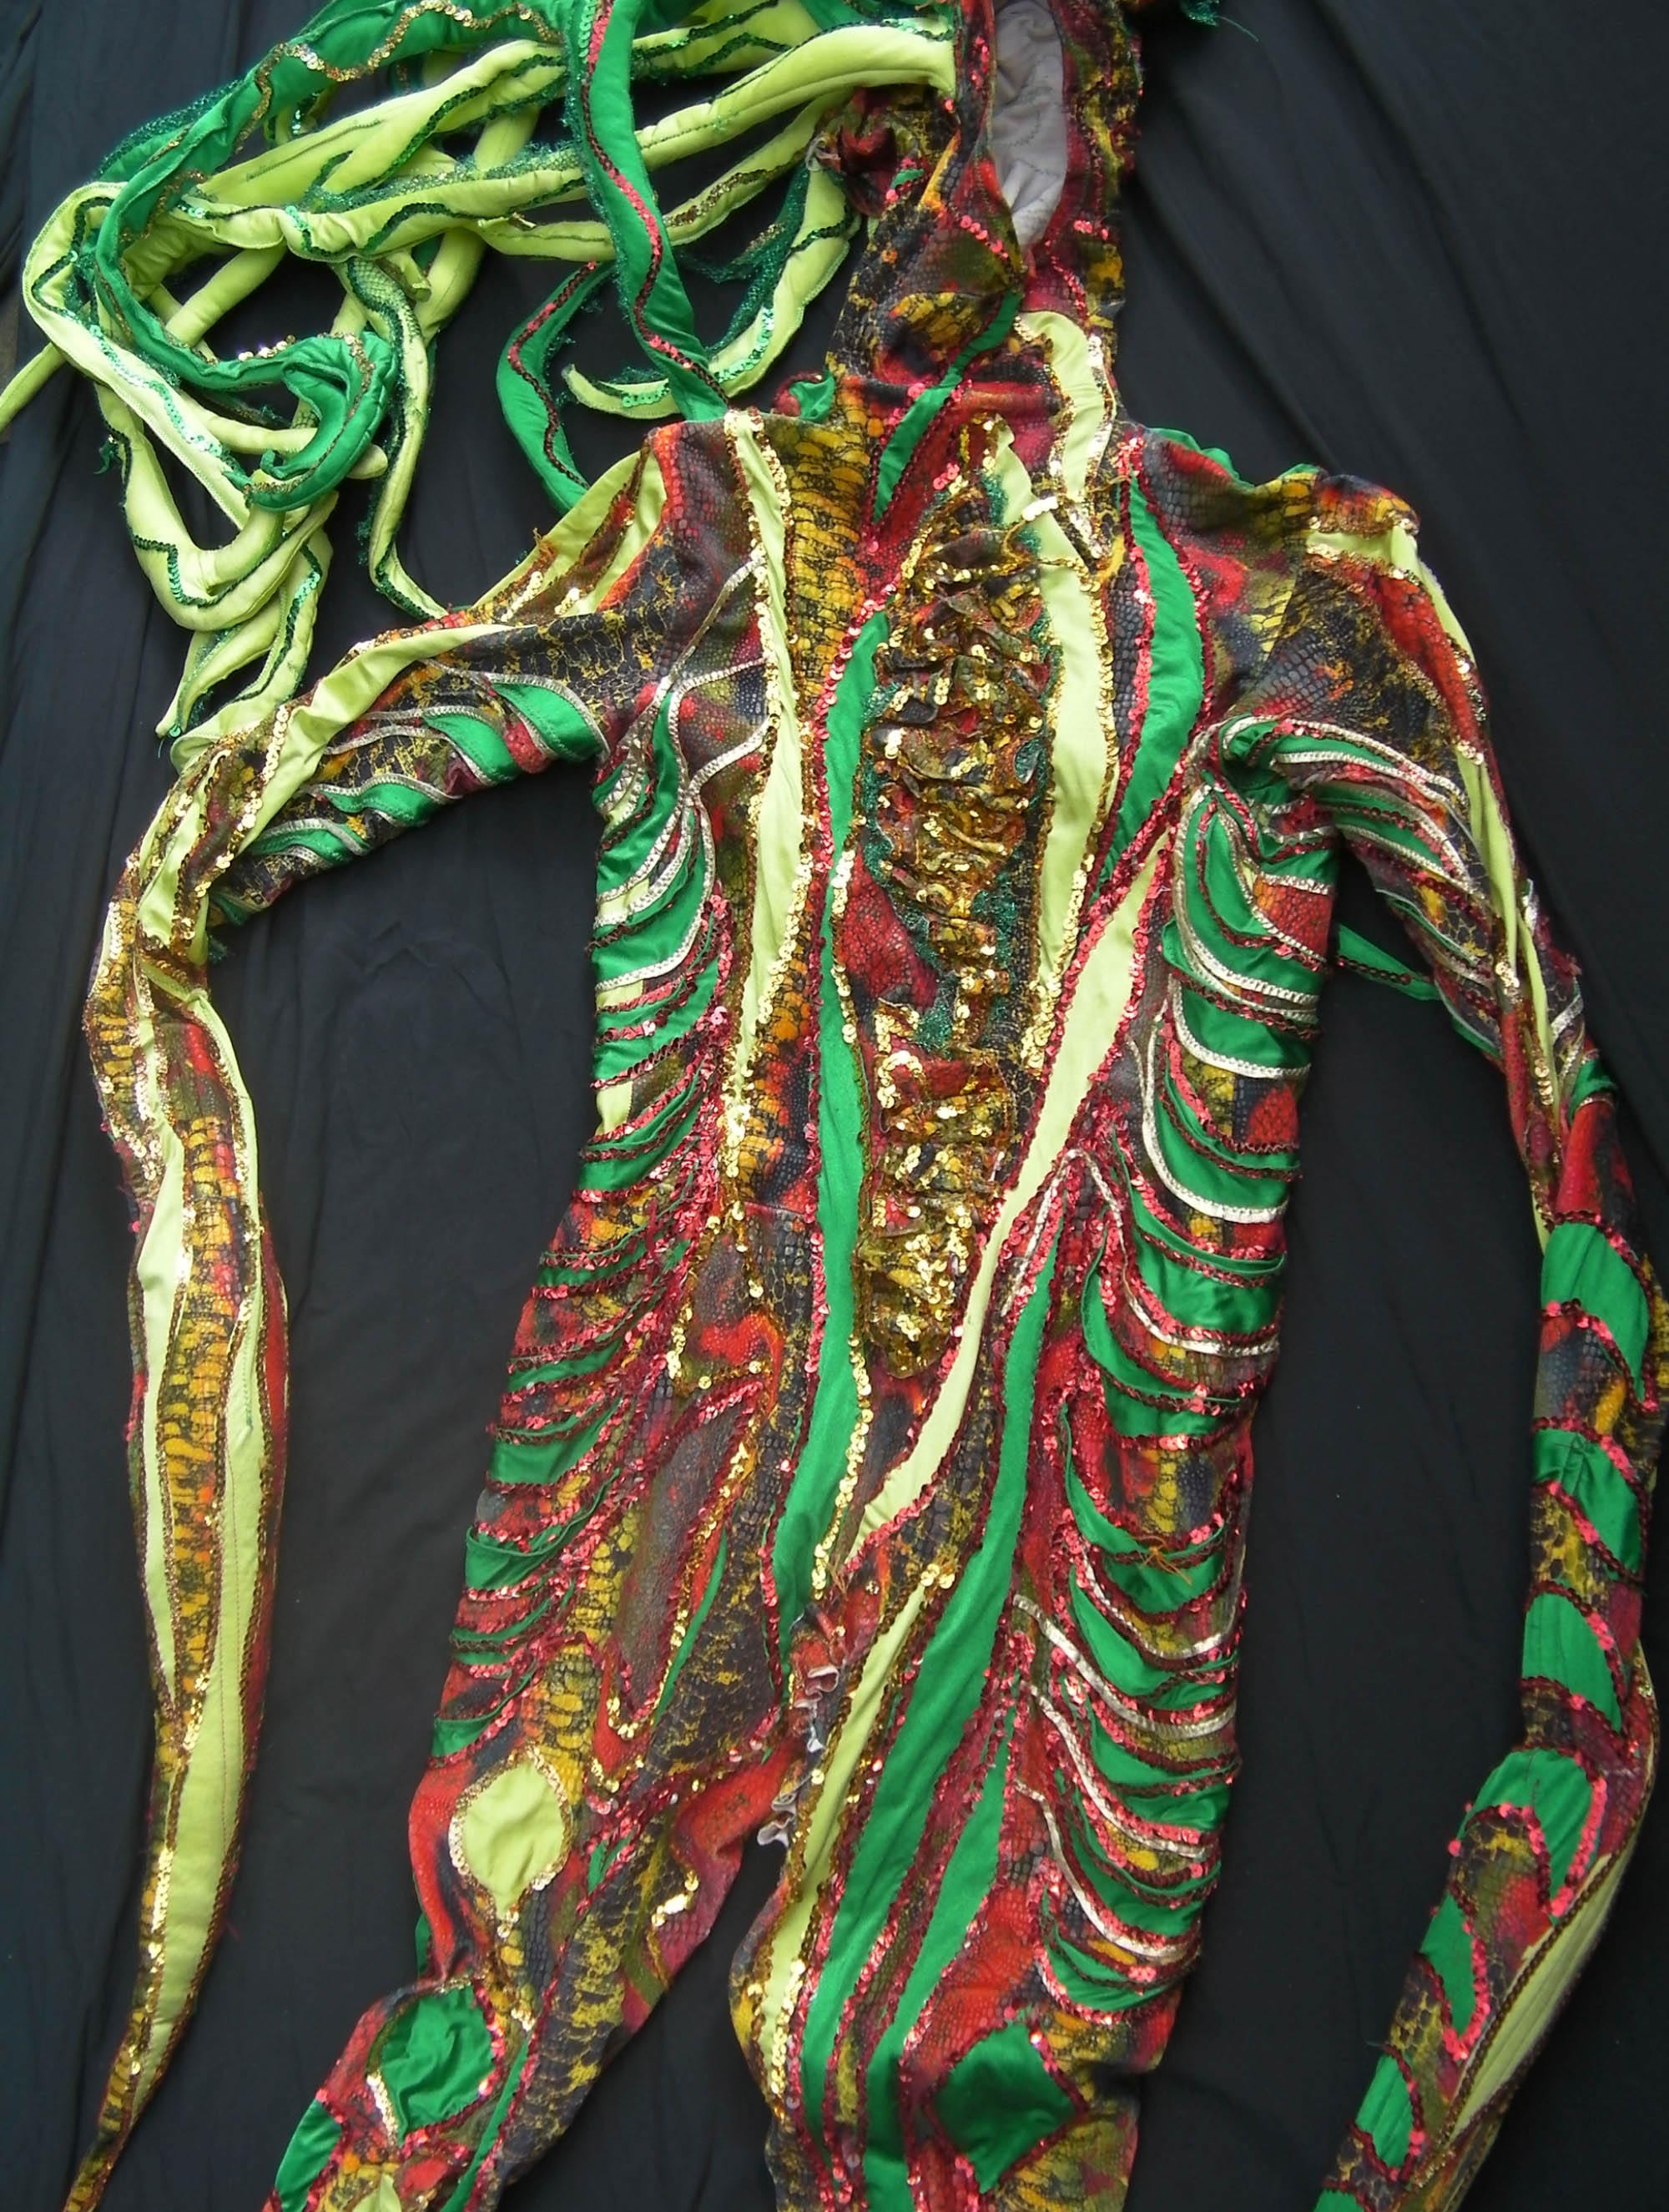 The costume ‘Snake woman’ from the show ‘Rubicon’